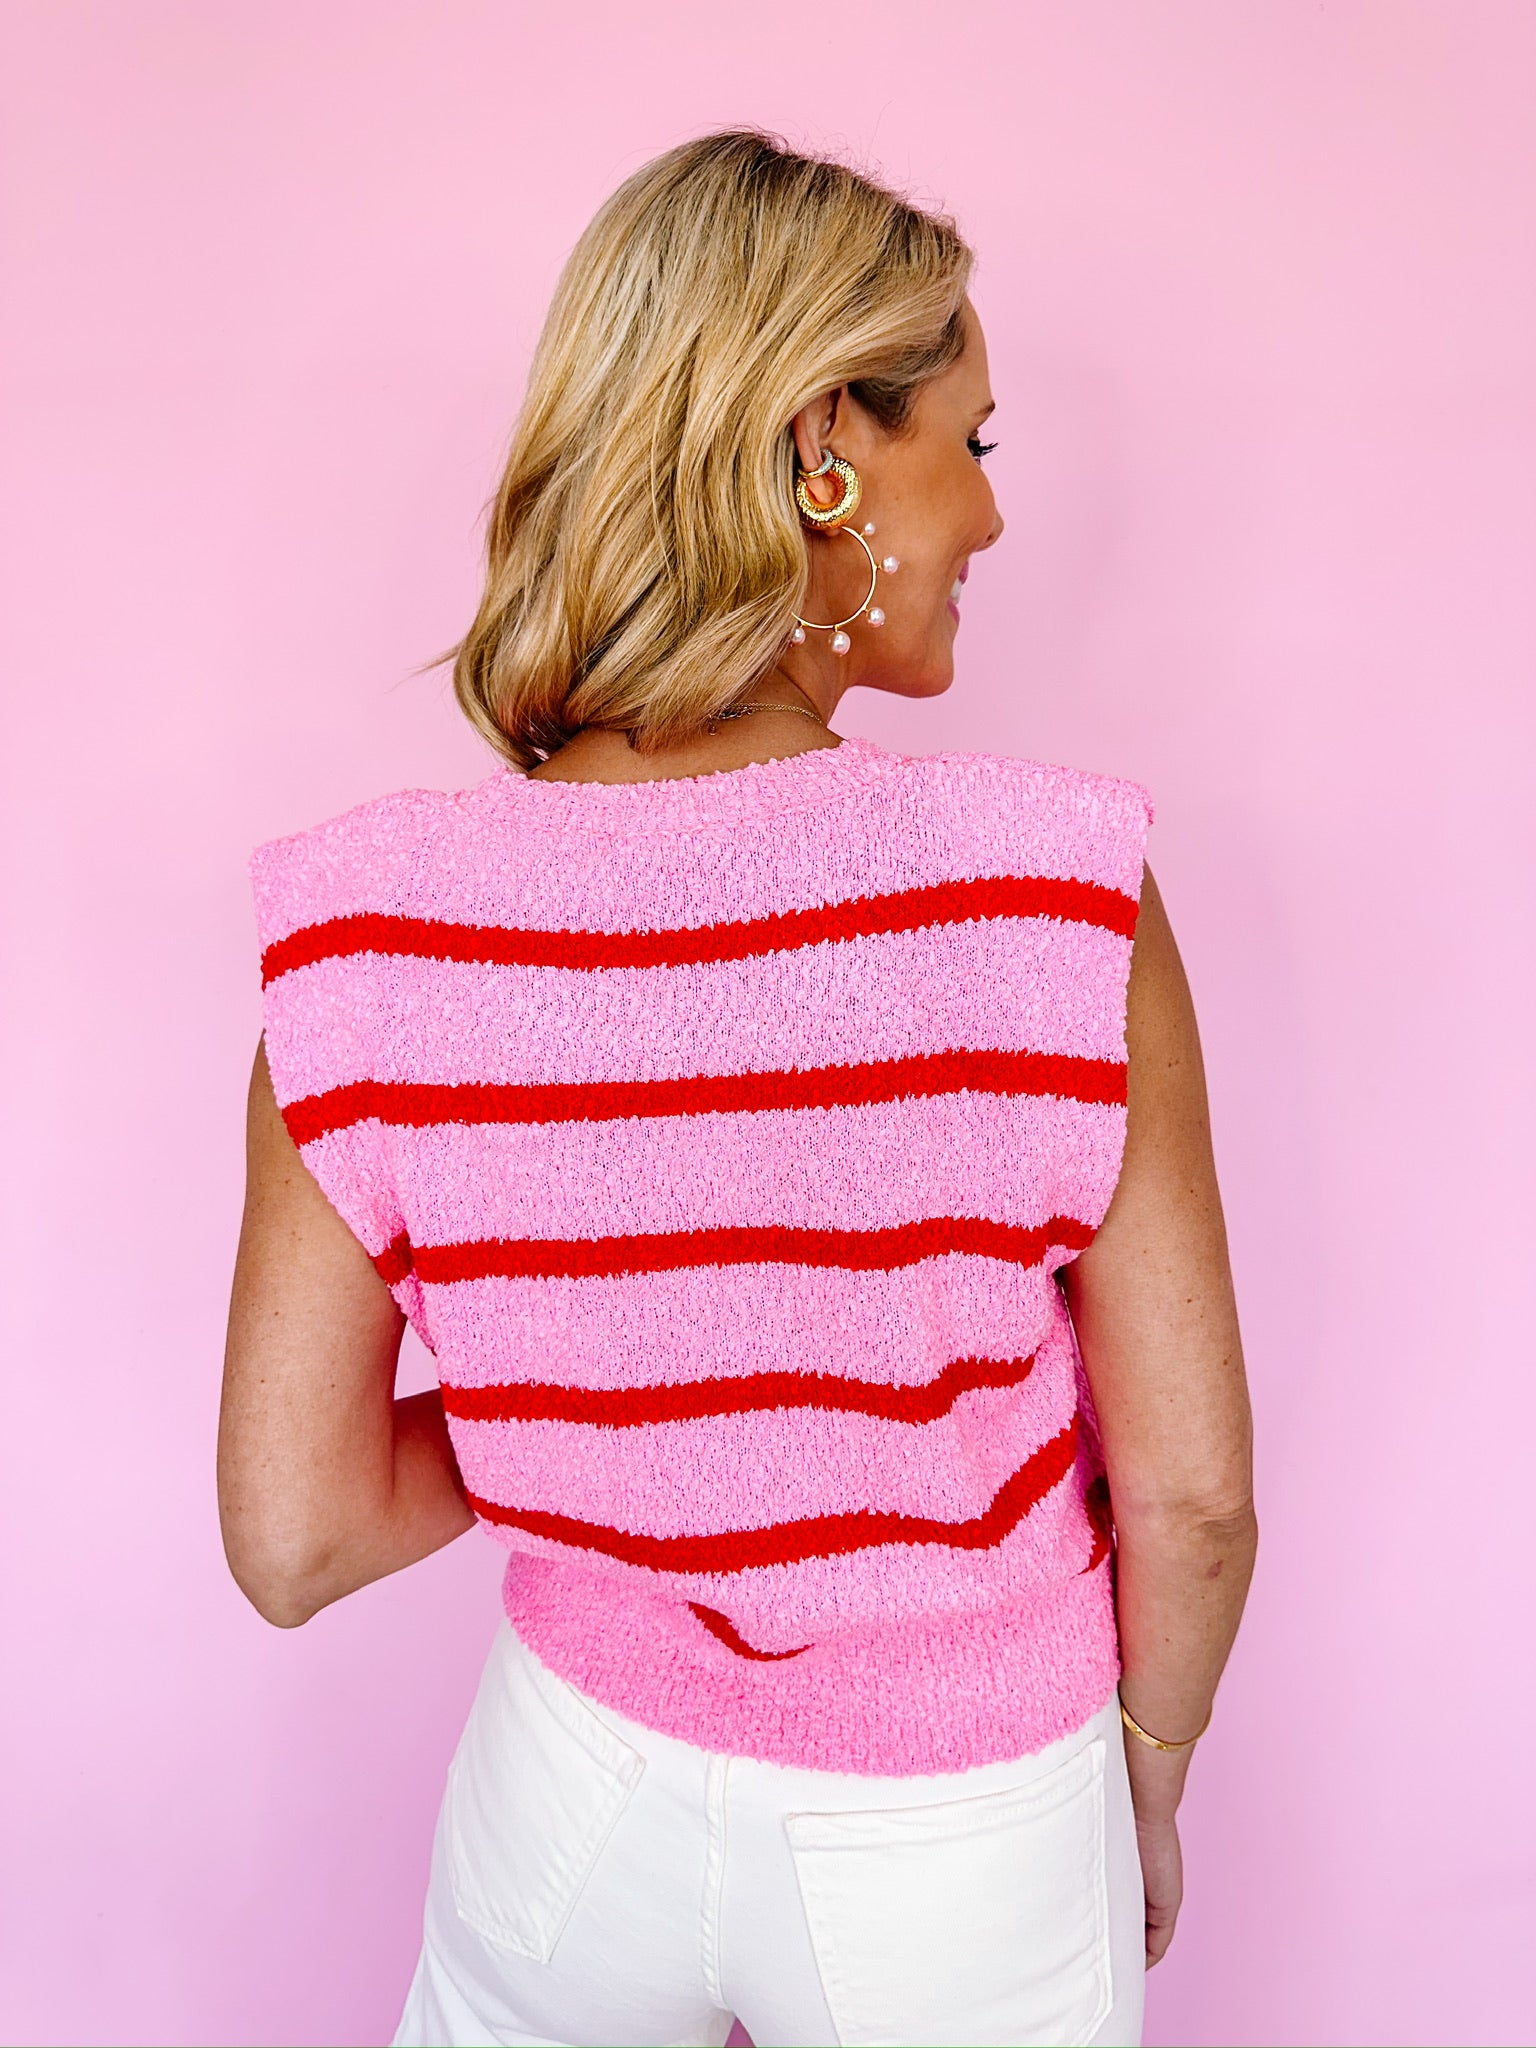 BRIGHTEN MY DAY STRIPED MUSCLE TOP - PINK